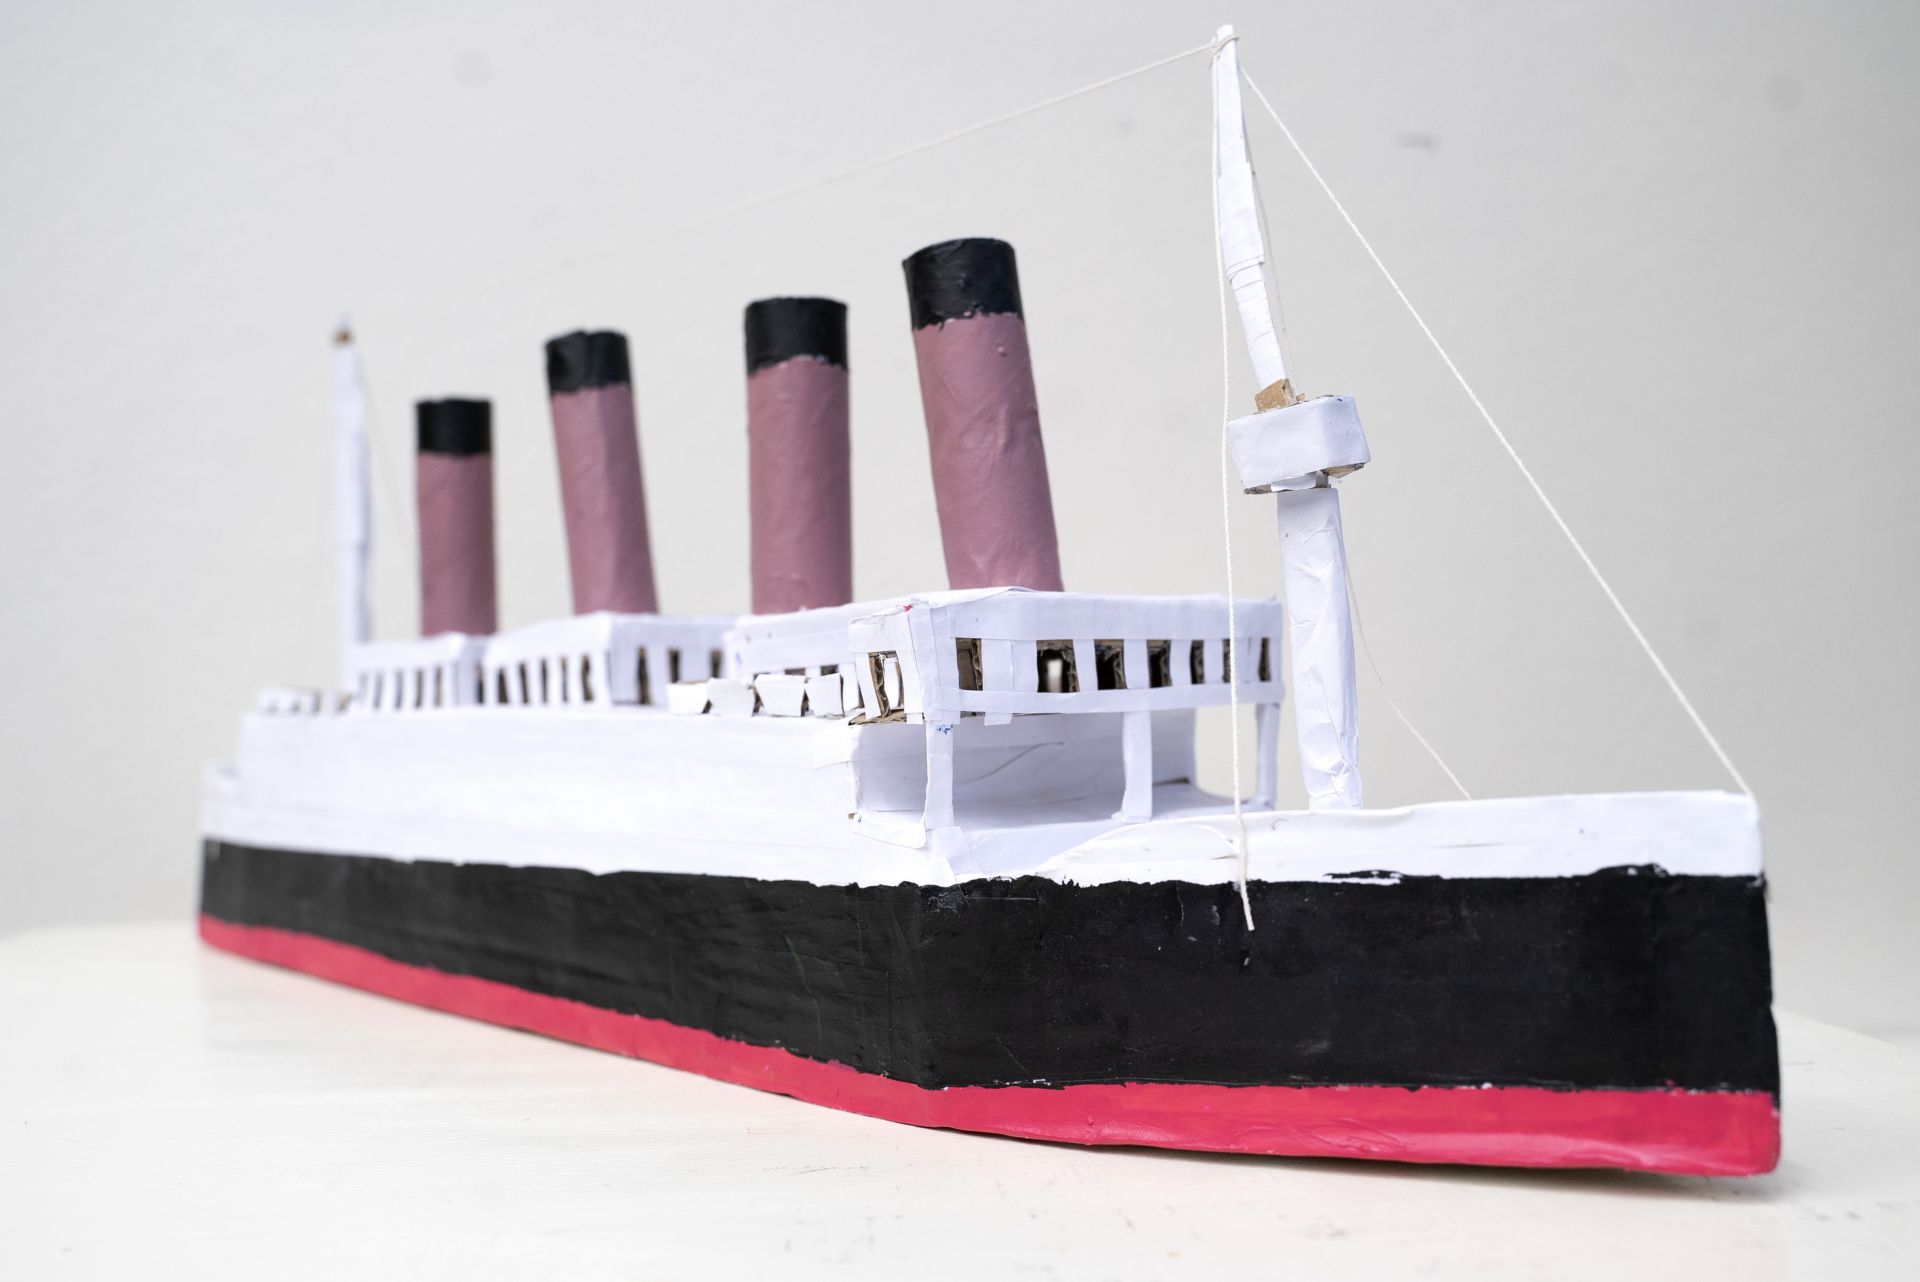 Cardboard miniature of the RMS Titanic. The ship is painted in white, black, red and lilac.